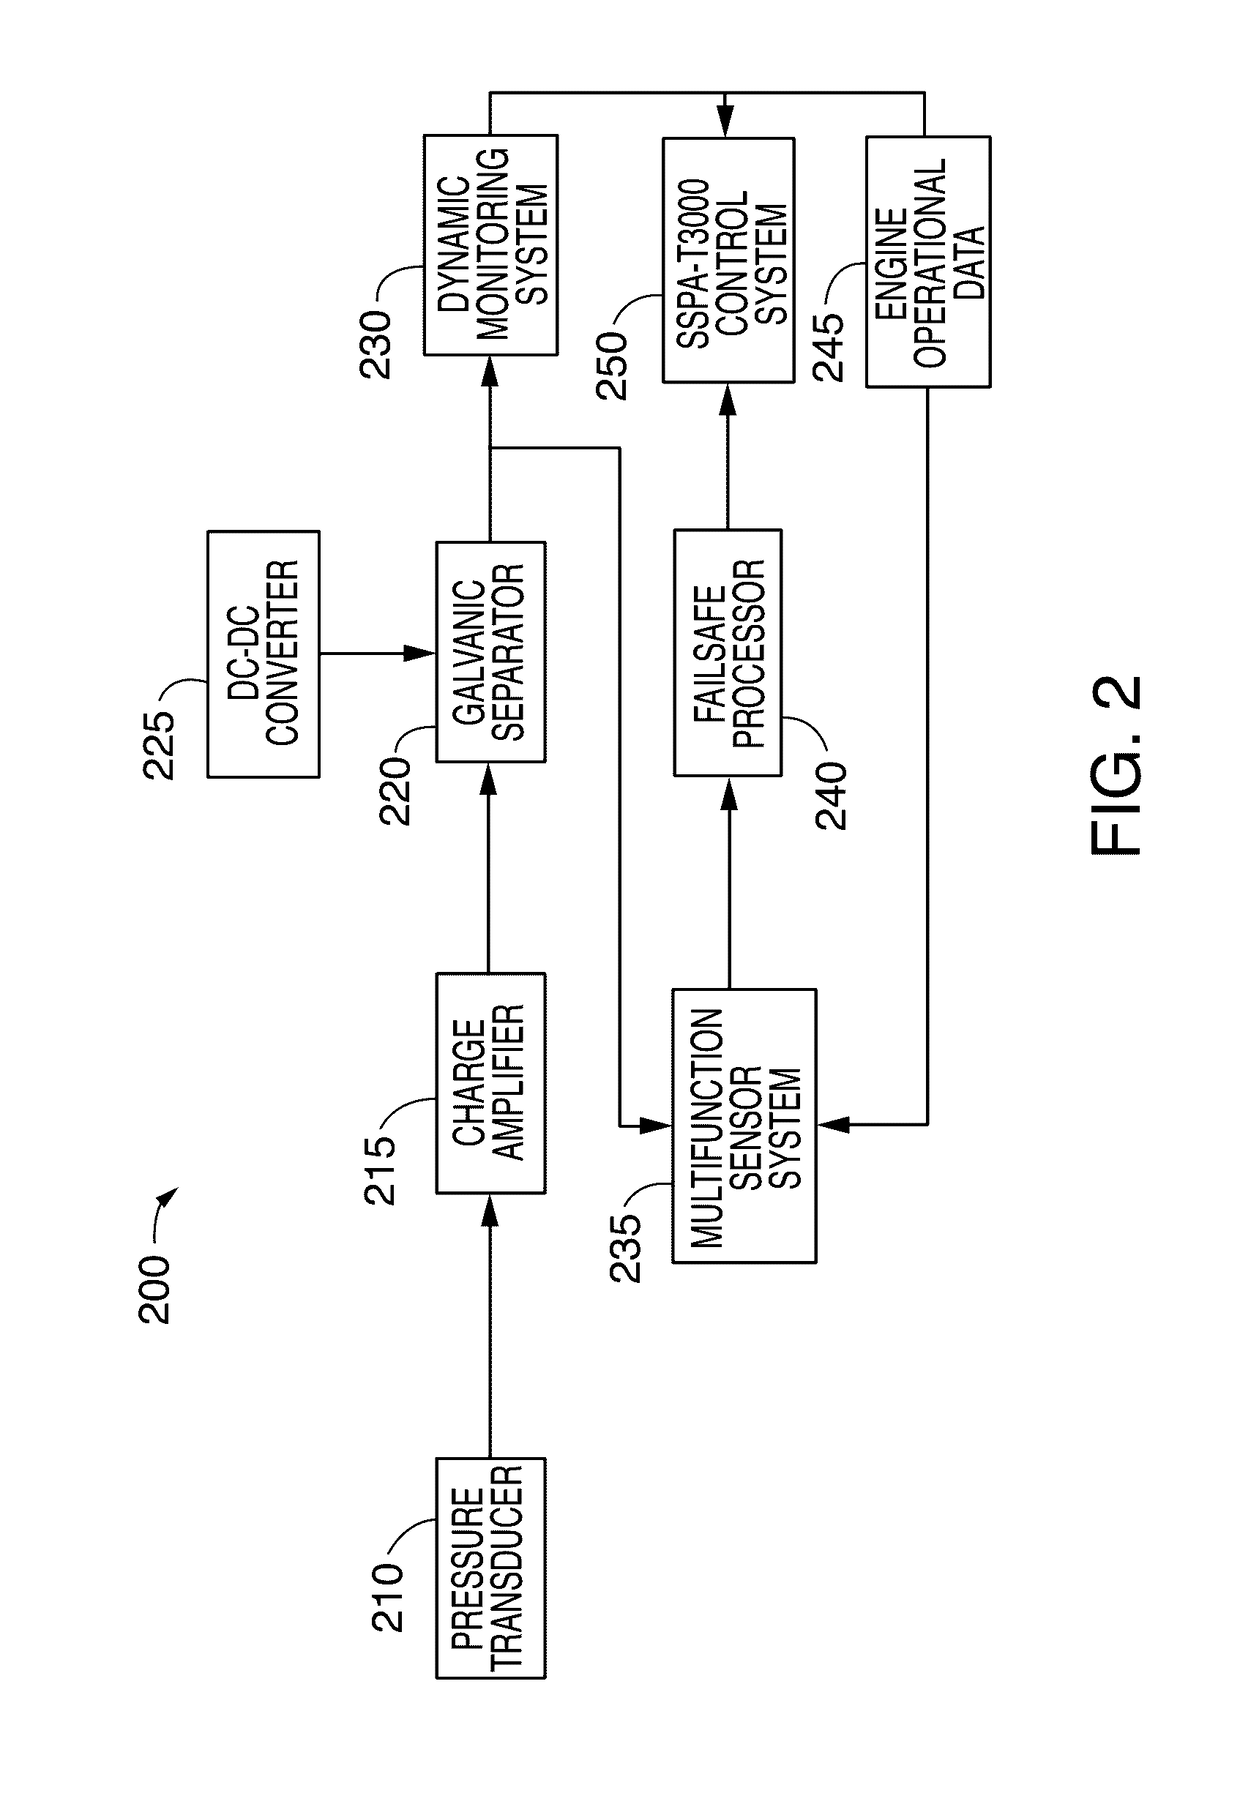 Dynamic pressure method of detecting flame on/off in gas turbine combustion cans for engine protection